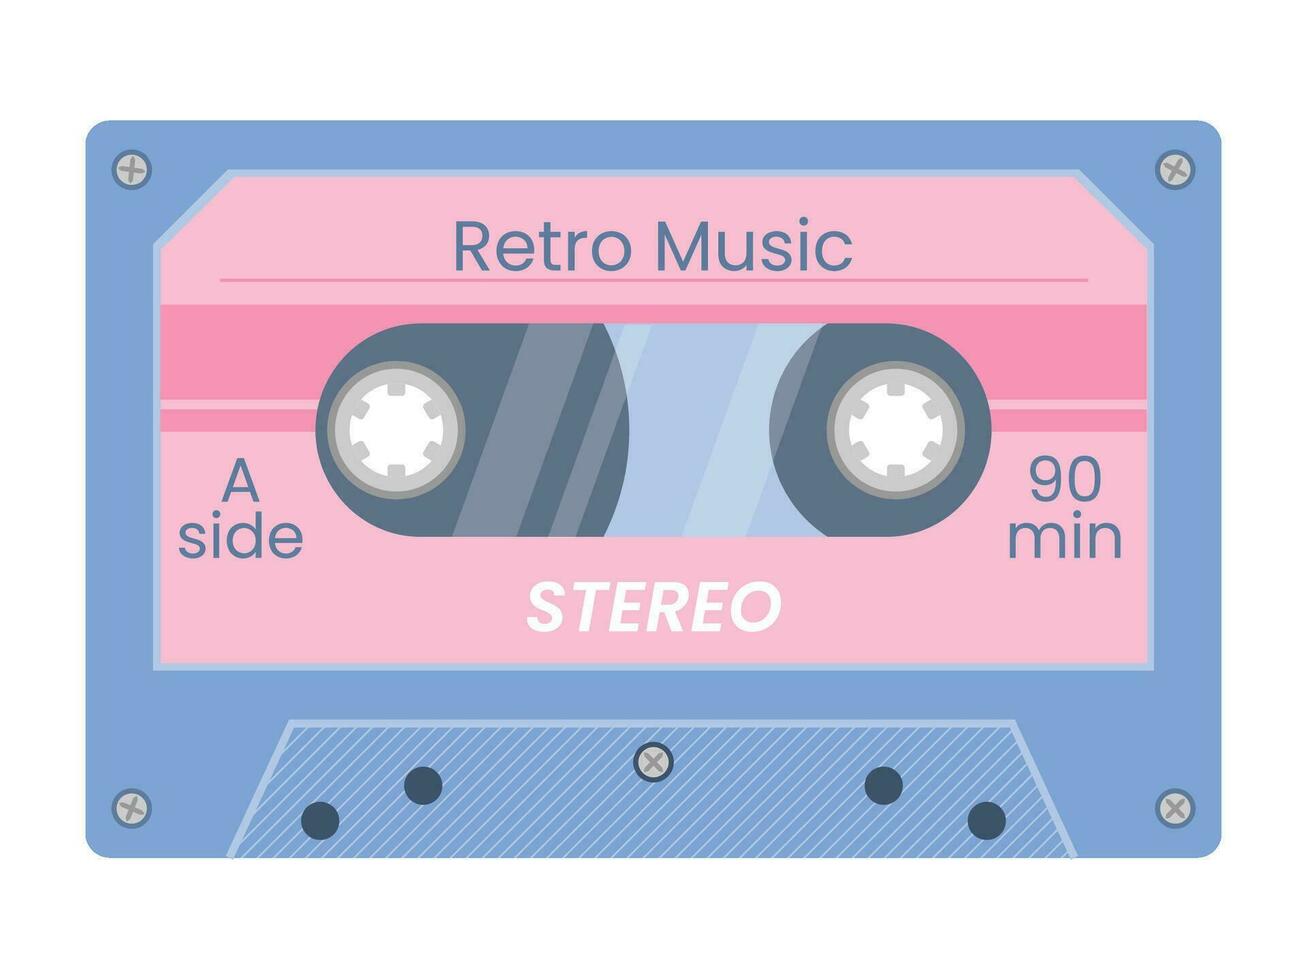 Vintage audio cassette tape. Retro mixtape of tunes and songs 1980s or 1990s. Audio equipment for analog music records. Trendy groovy pop object for poster, banner, card, cover, label, ad, stickers vector